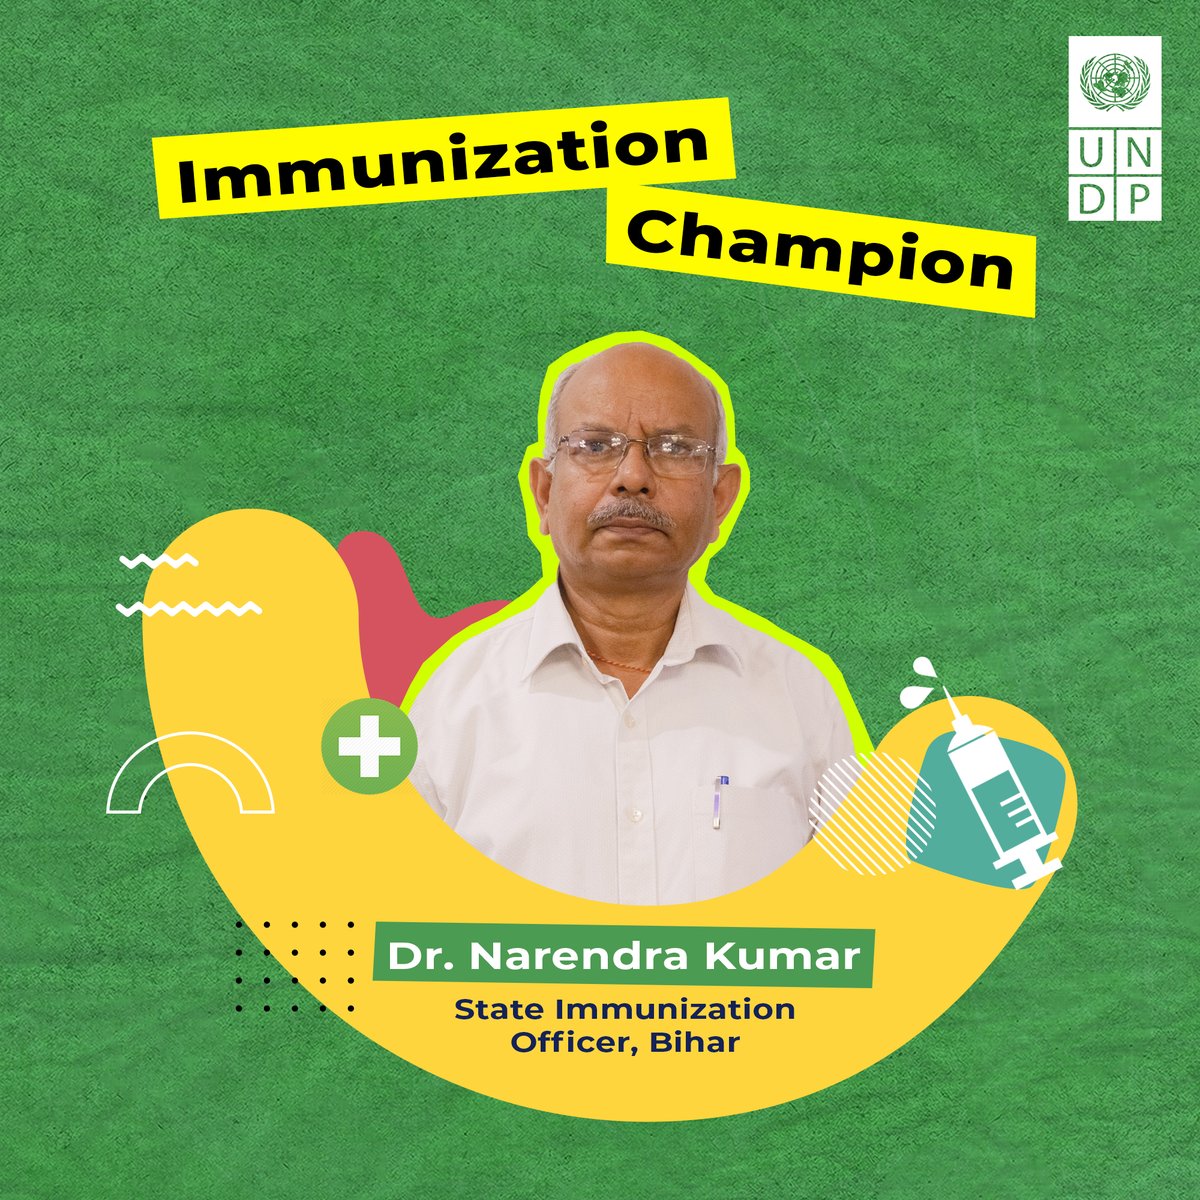 #ImmunizationChampion👨🏾‍⚕️: Meet Dr. Narendra Kumar Sinha from #Bihar.

He led creation of Model Immunization Centres to increase vaccination💉 among poor urban communities.

This #ImmunizationWeek, let’s salute our health heroes who put duty before self to ensure #LongLifeforAll.